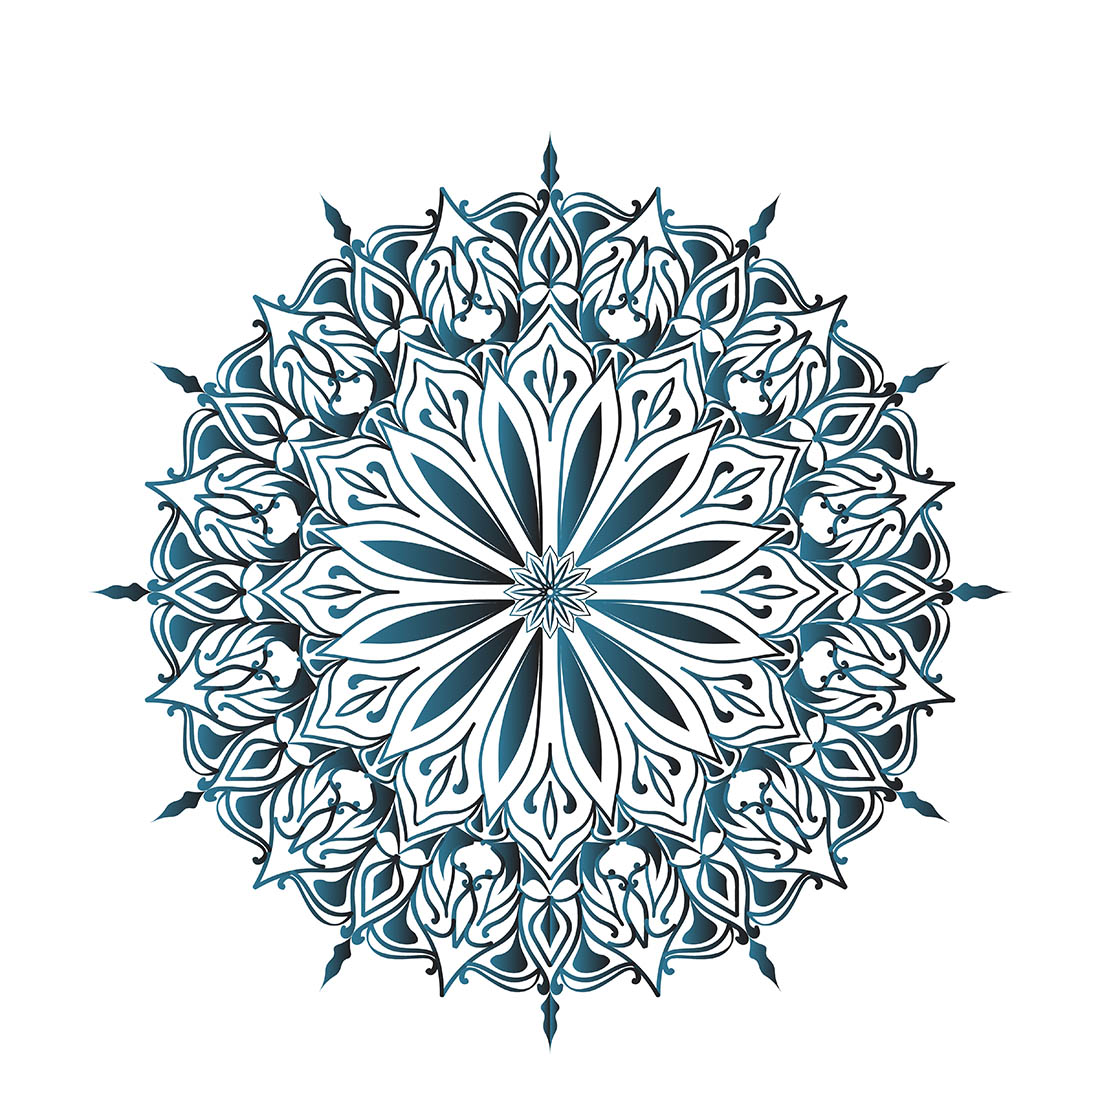 mandala art, mandala art designs, mandala art designs colourful, mandala art designs flower, drawing flower designs mandala art, creative mandala art preview image.